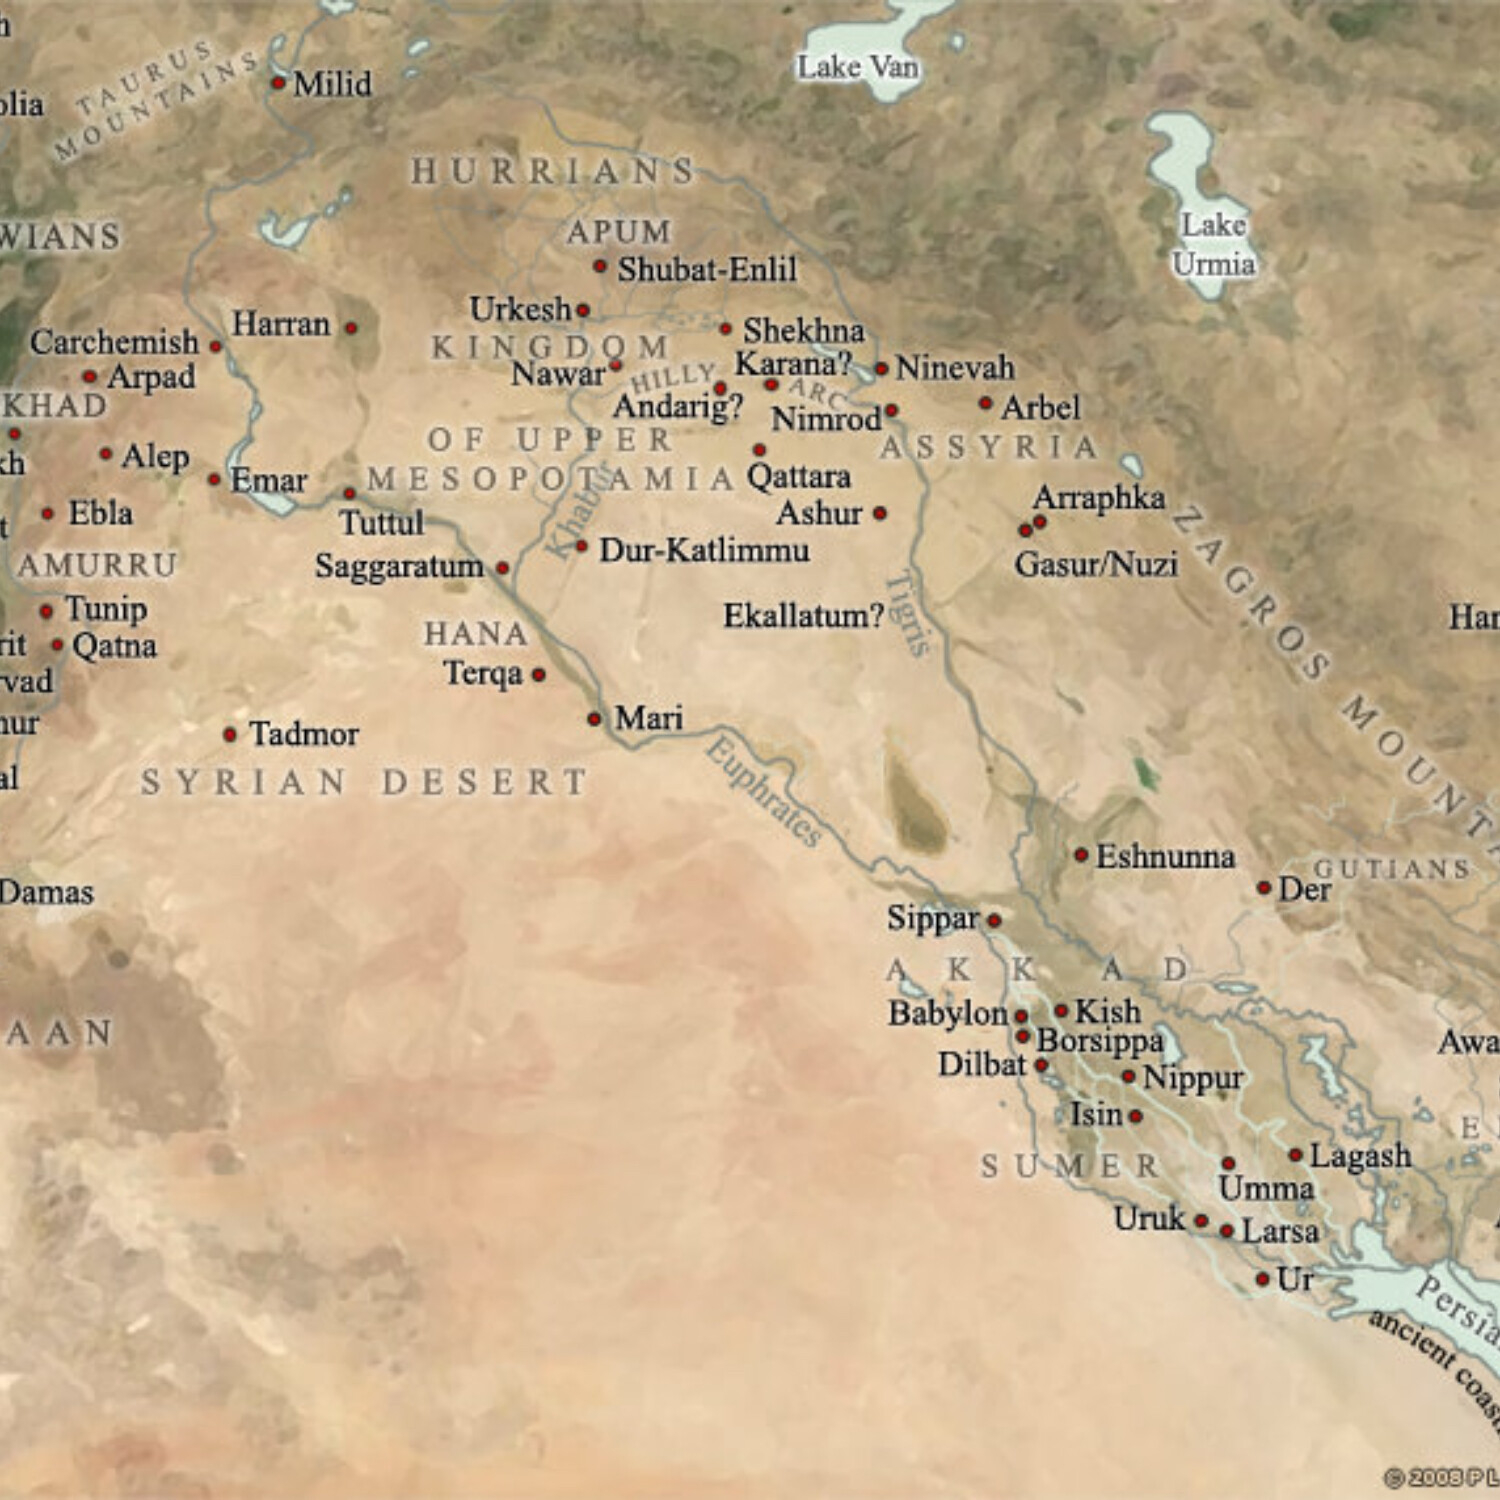 Mesopotamia: The Rise of the Cities